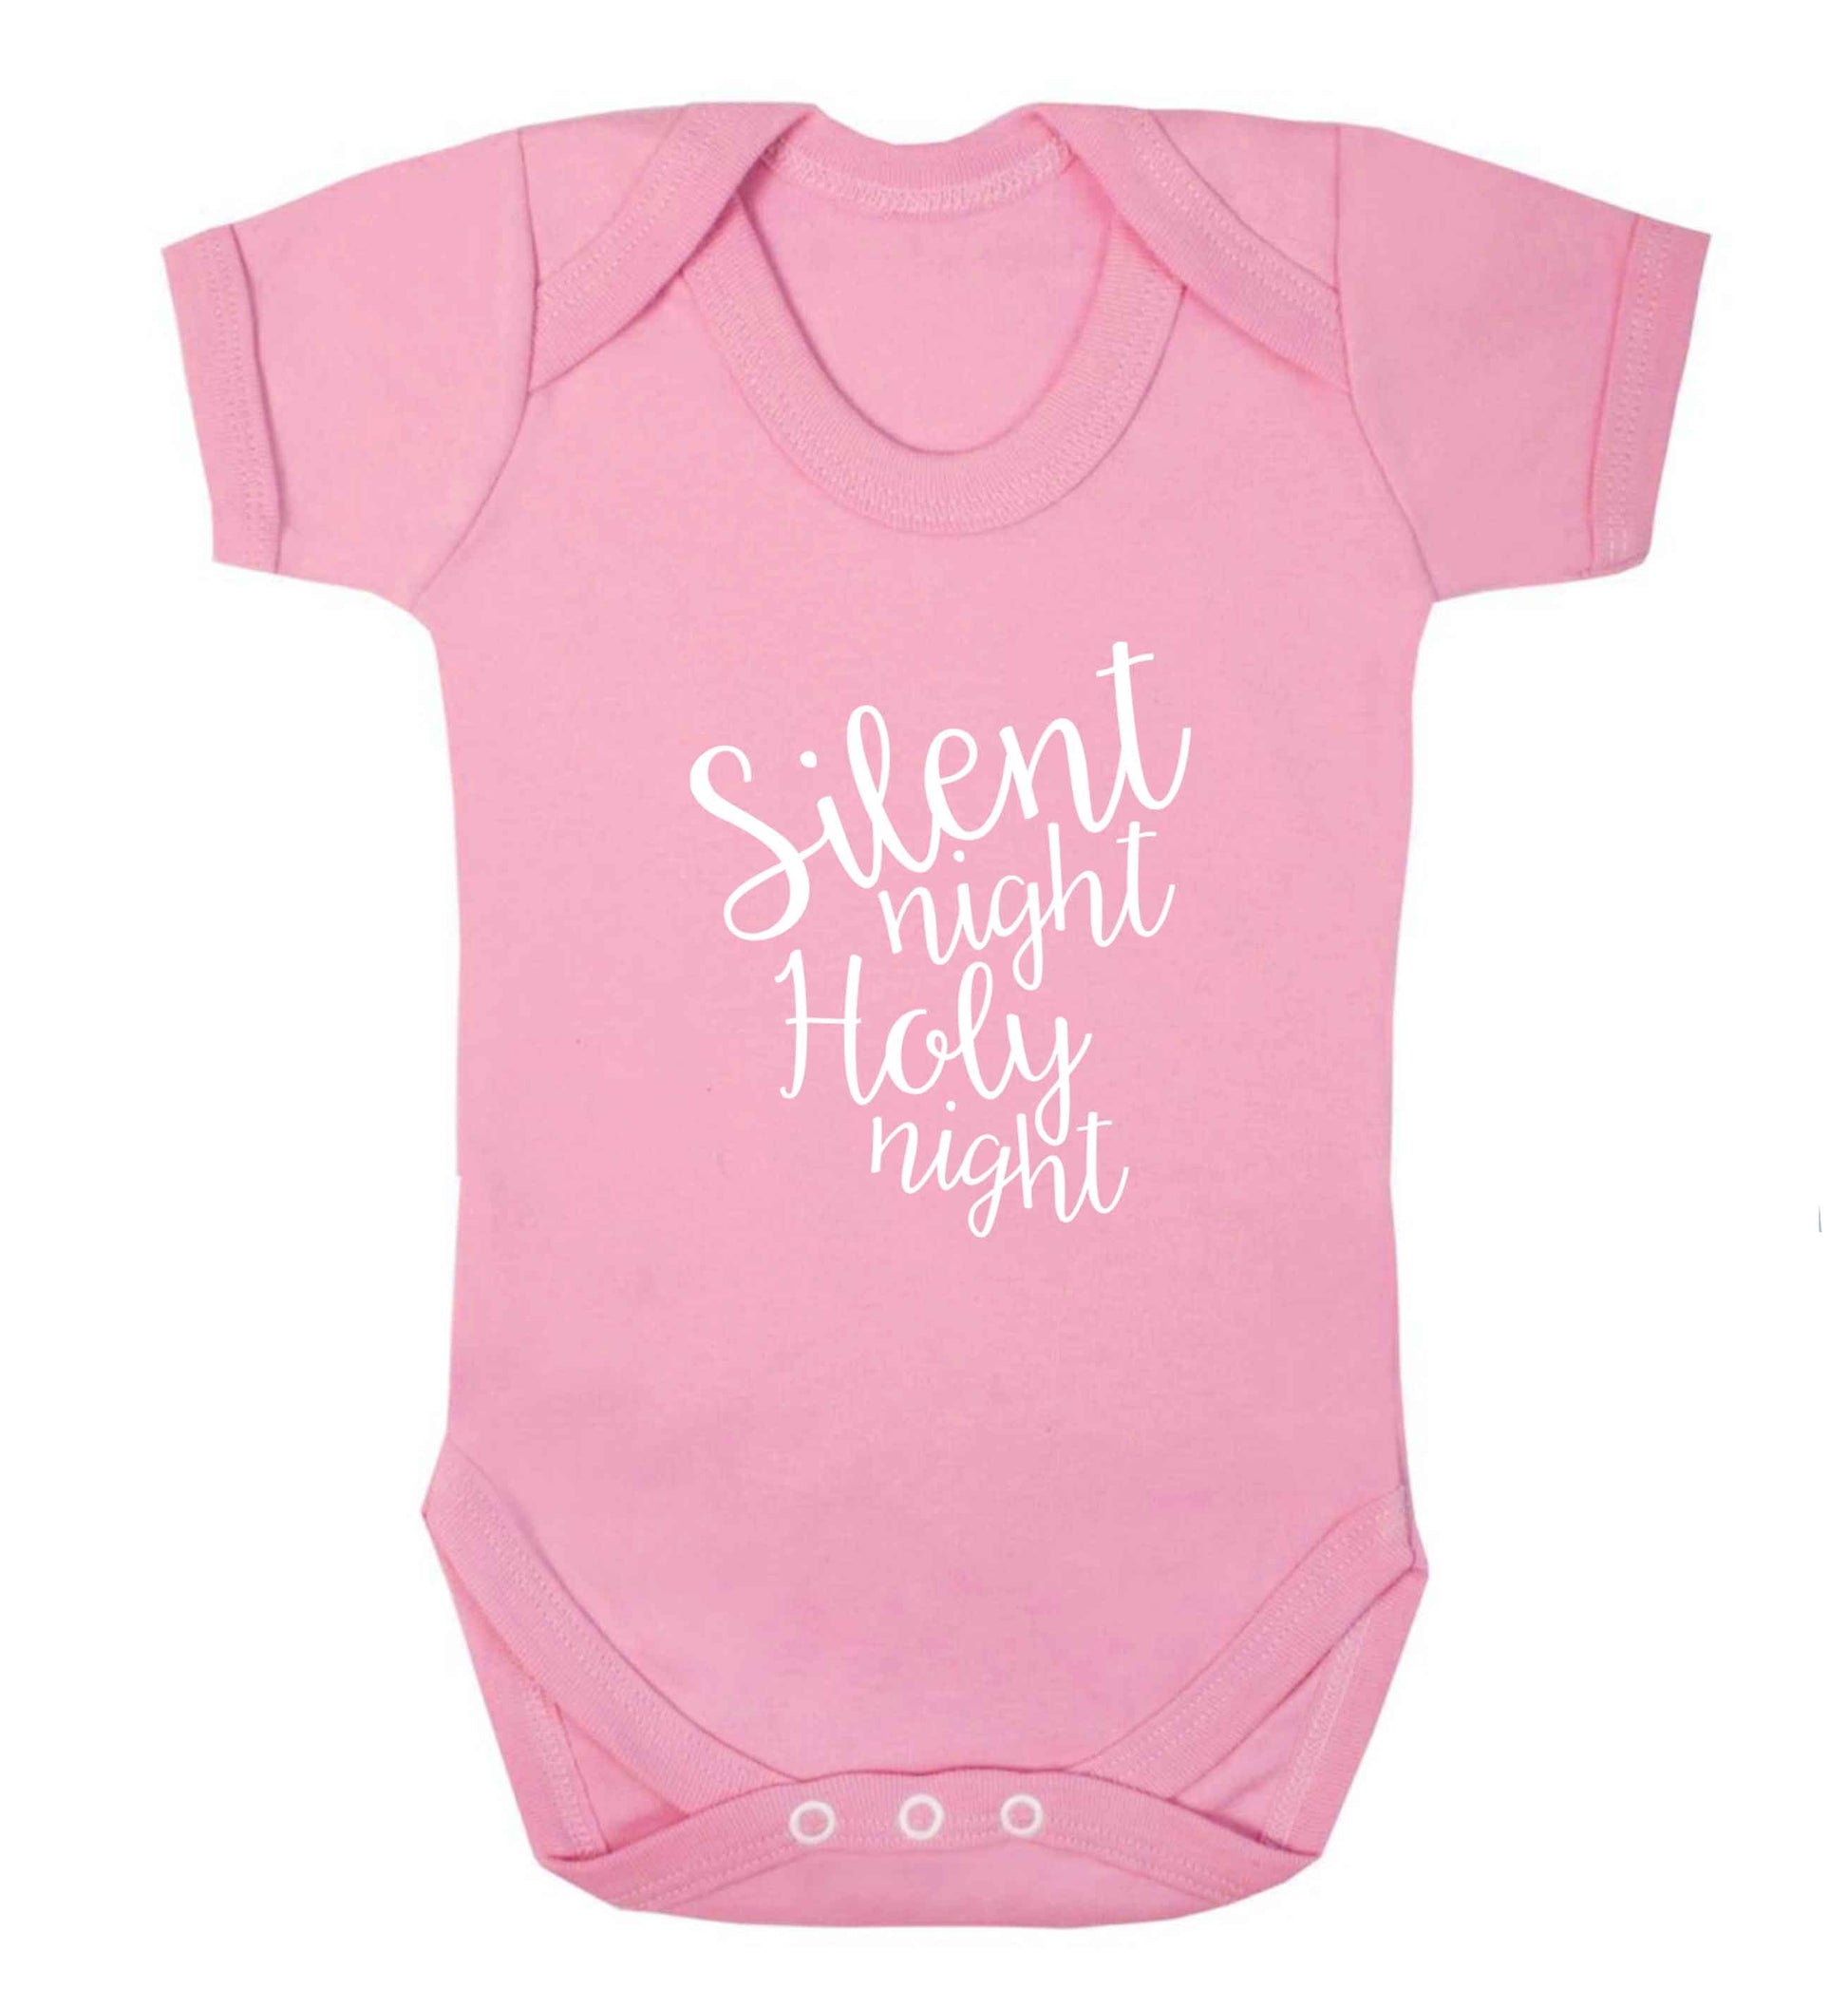 Silent night holy night baby vest pale pink 18-24 months